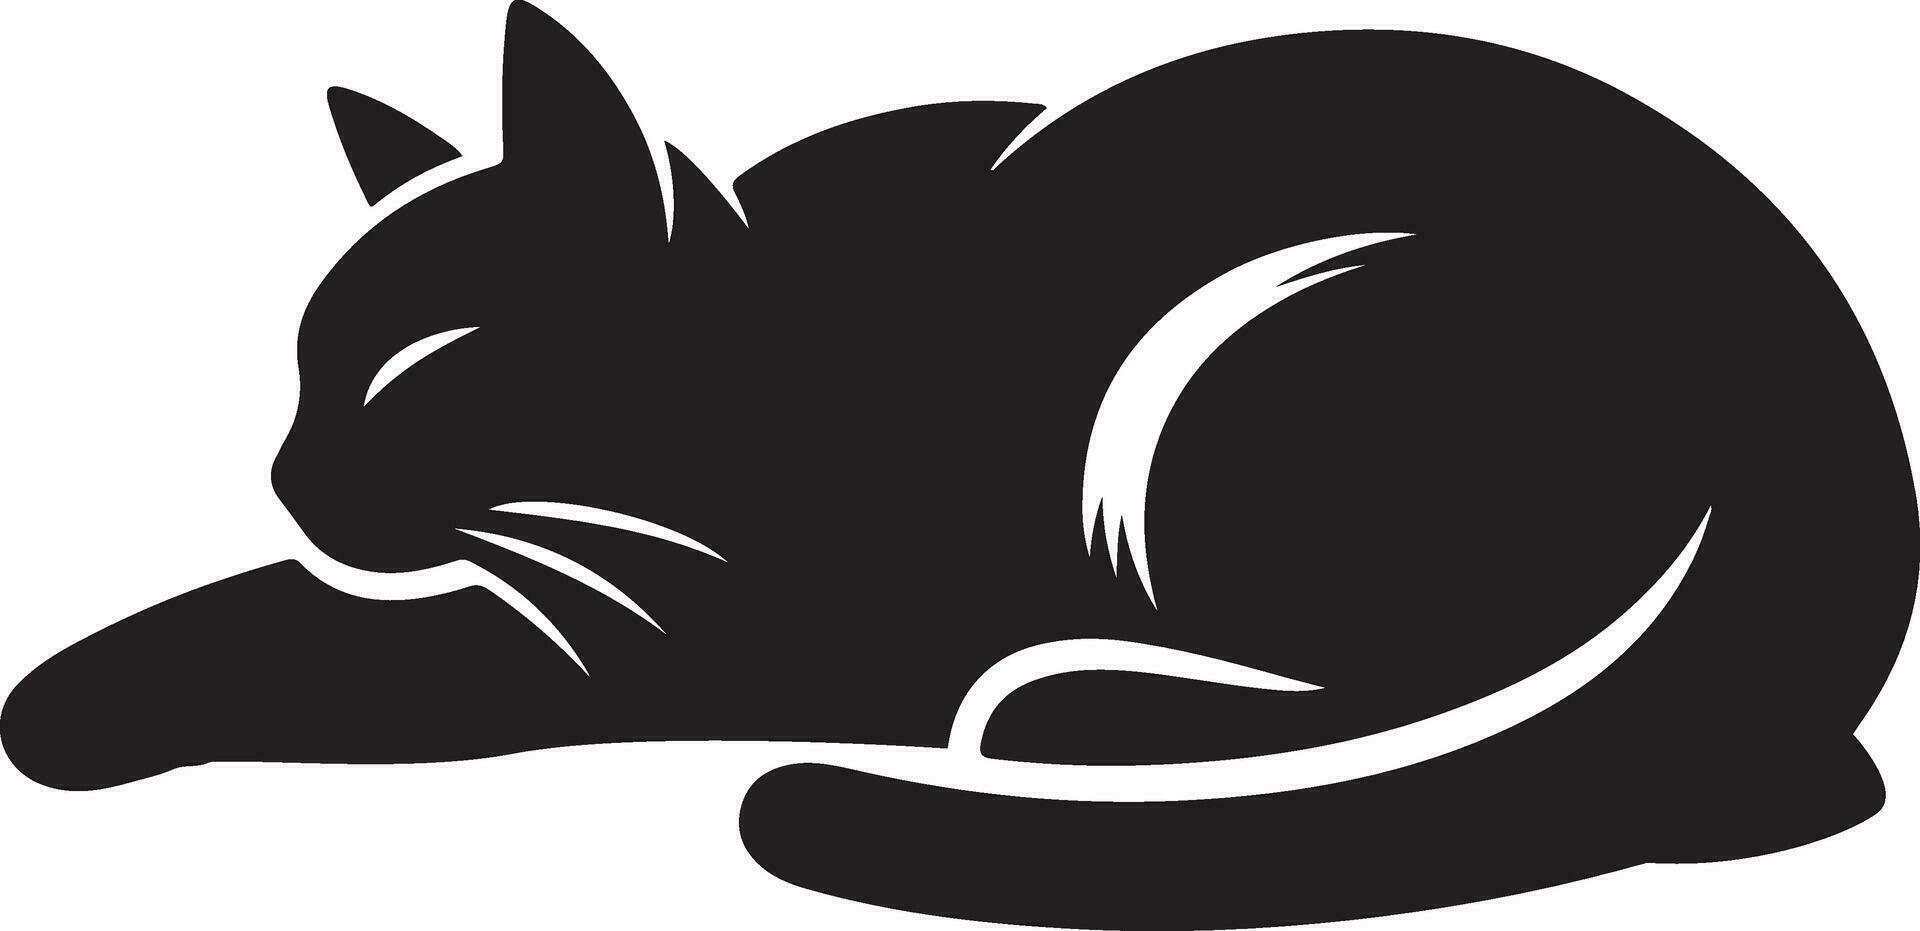 a minimal a cat sleep and watching dream vector art illustration silhouette 21